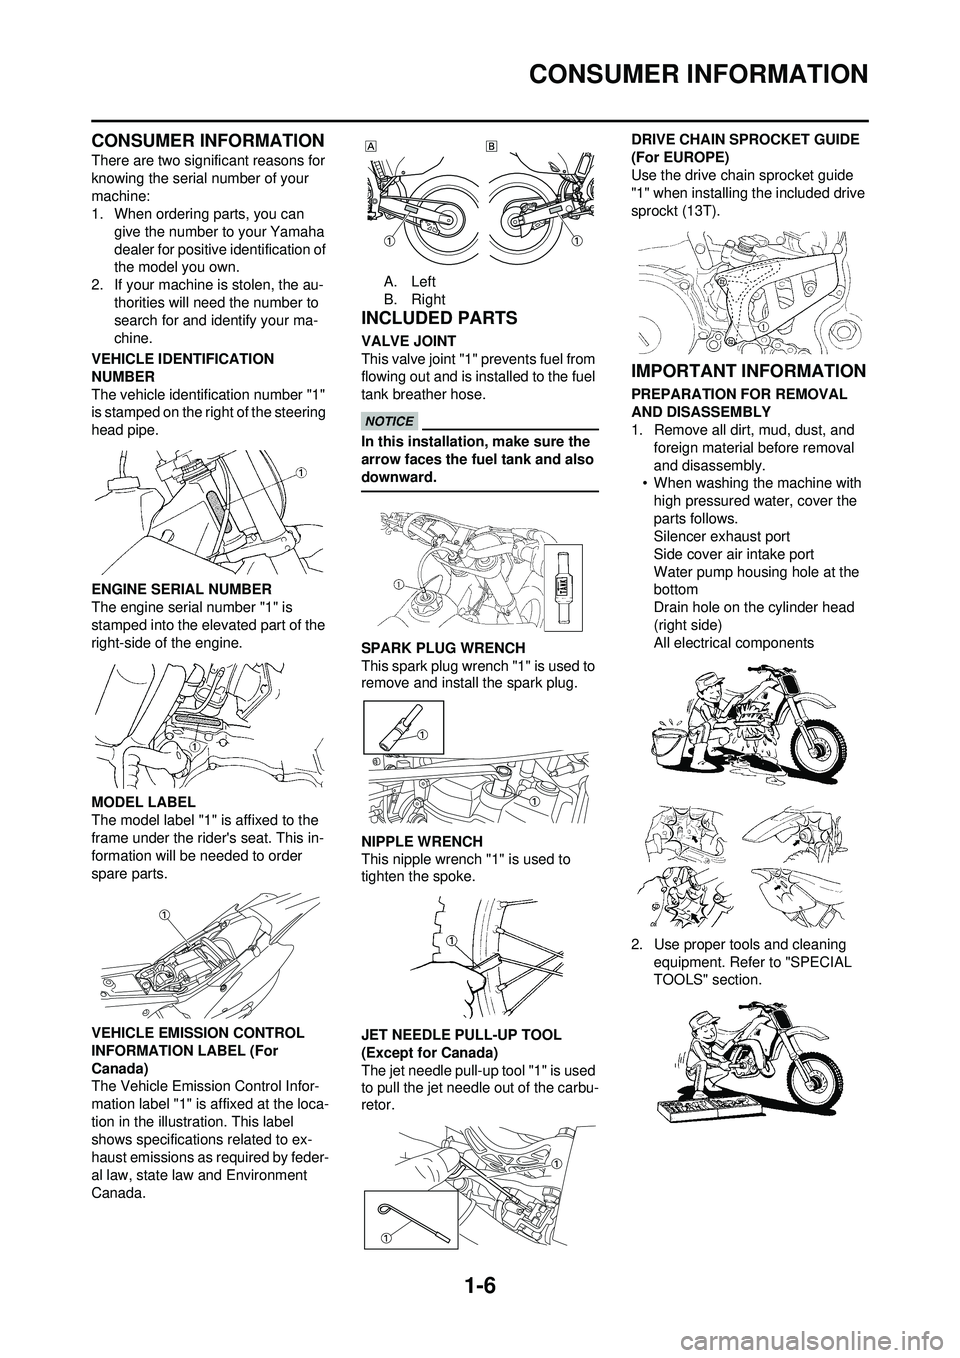 YAMAHA WR 250F 2010  Owners Manual 1-6
CONSUMER INFORMATION
CONSUMER INFORMATION
There are two significant reasons for 
knowing the serial number of your 
machine:
1. When ordering parts, you can give the number to your Yamaha 
dealer 